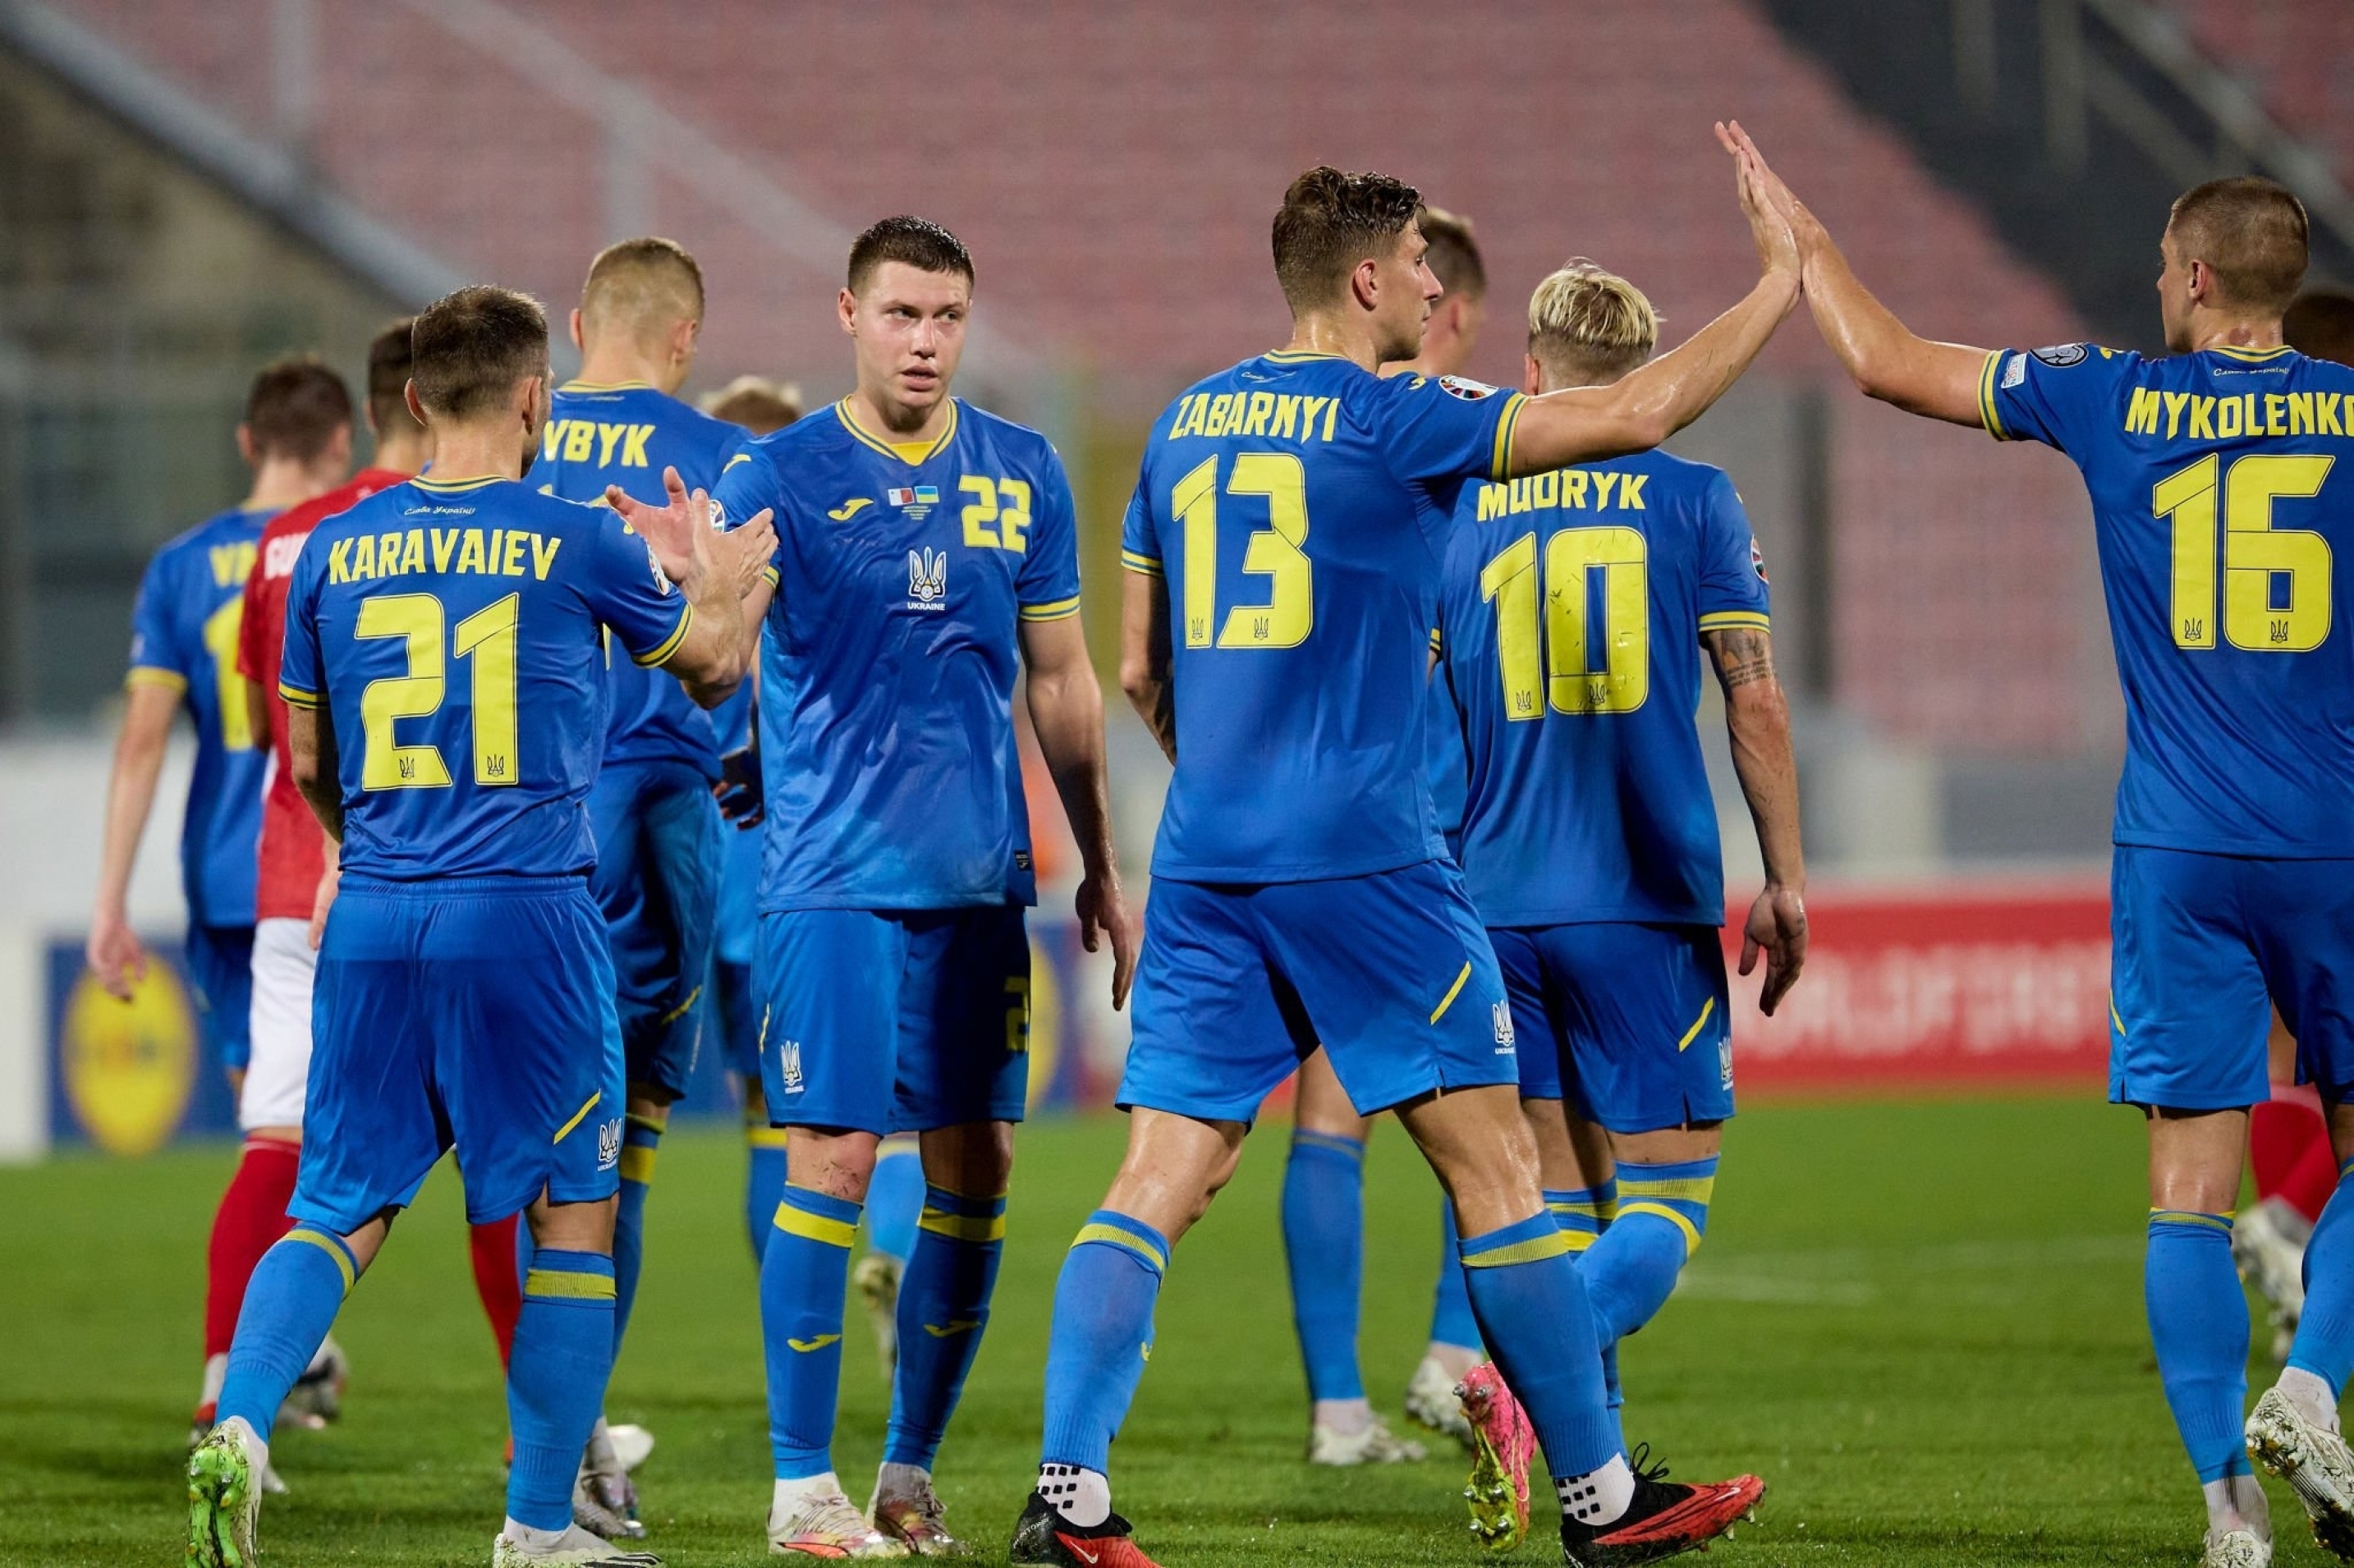 Italy vs Ukraine - ITA vs UKR - Azzurri can book a spot to next year's Euro finals with a single point from their next Euro Qualifiers game